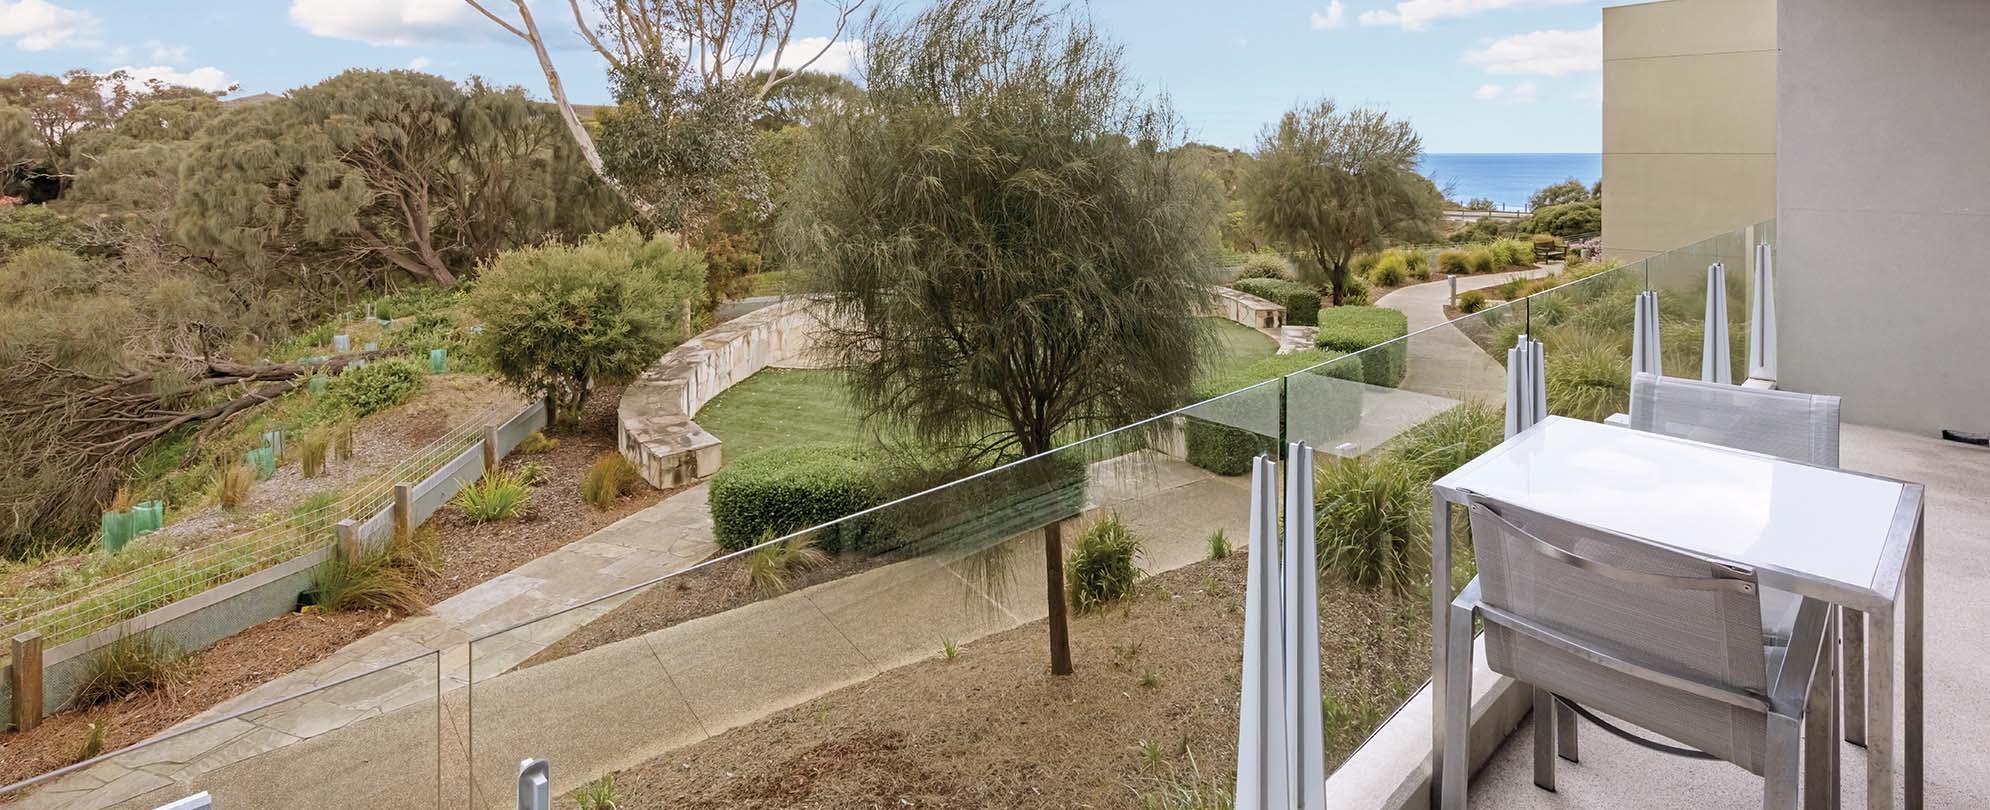 The balcony view from a 1-bedroom suite at Club Wyndham Torquay.